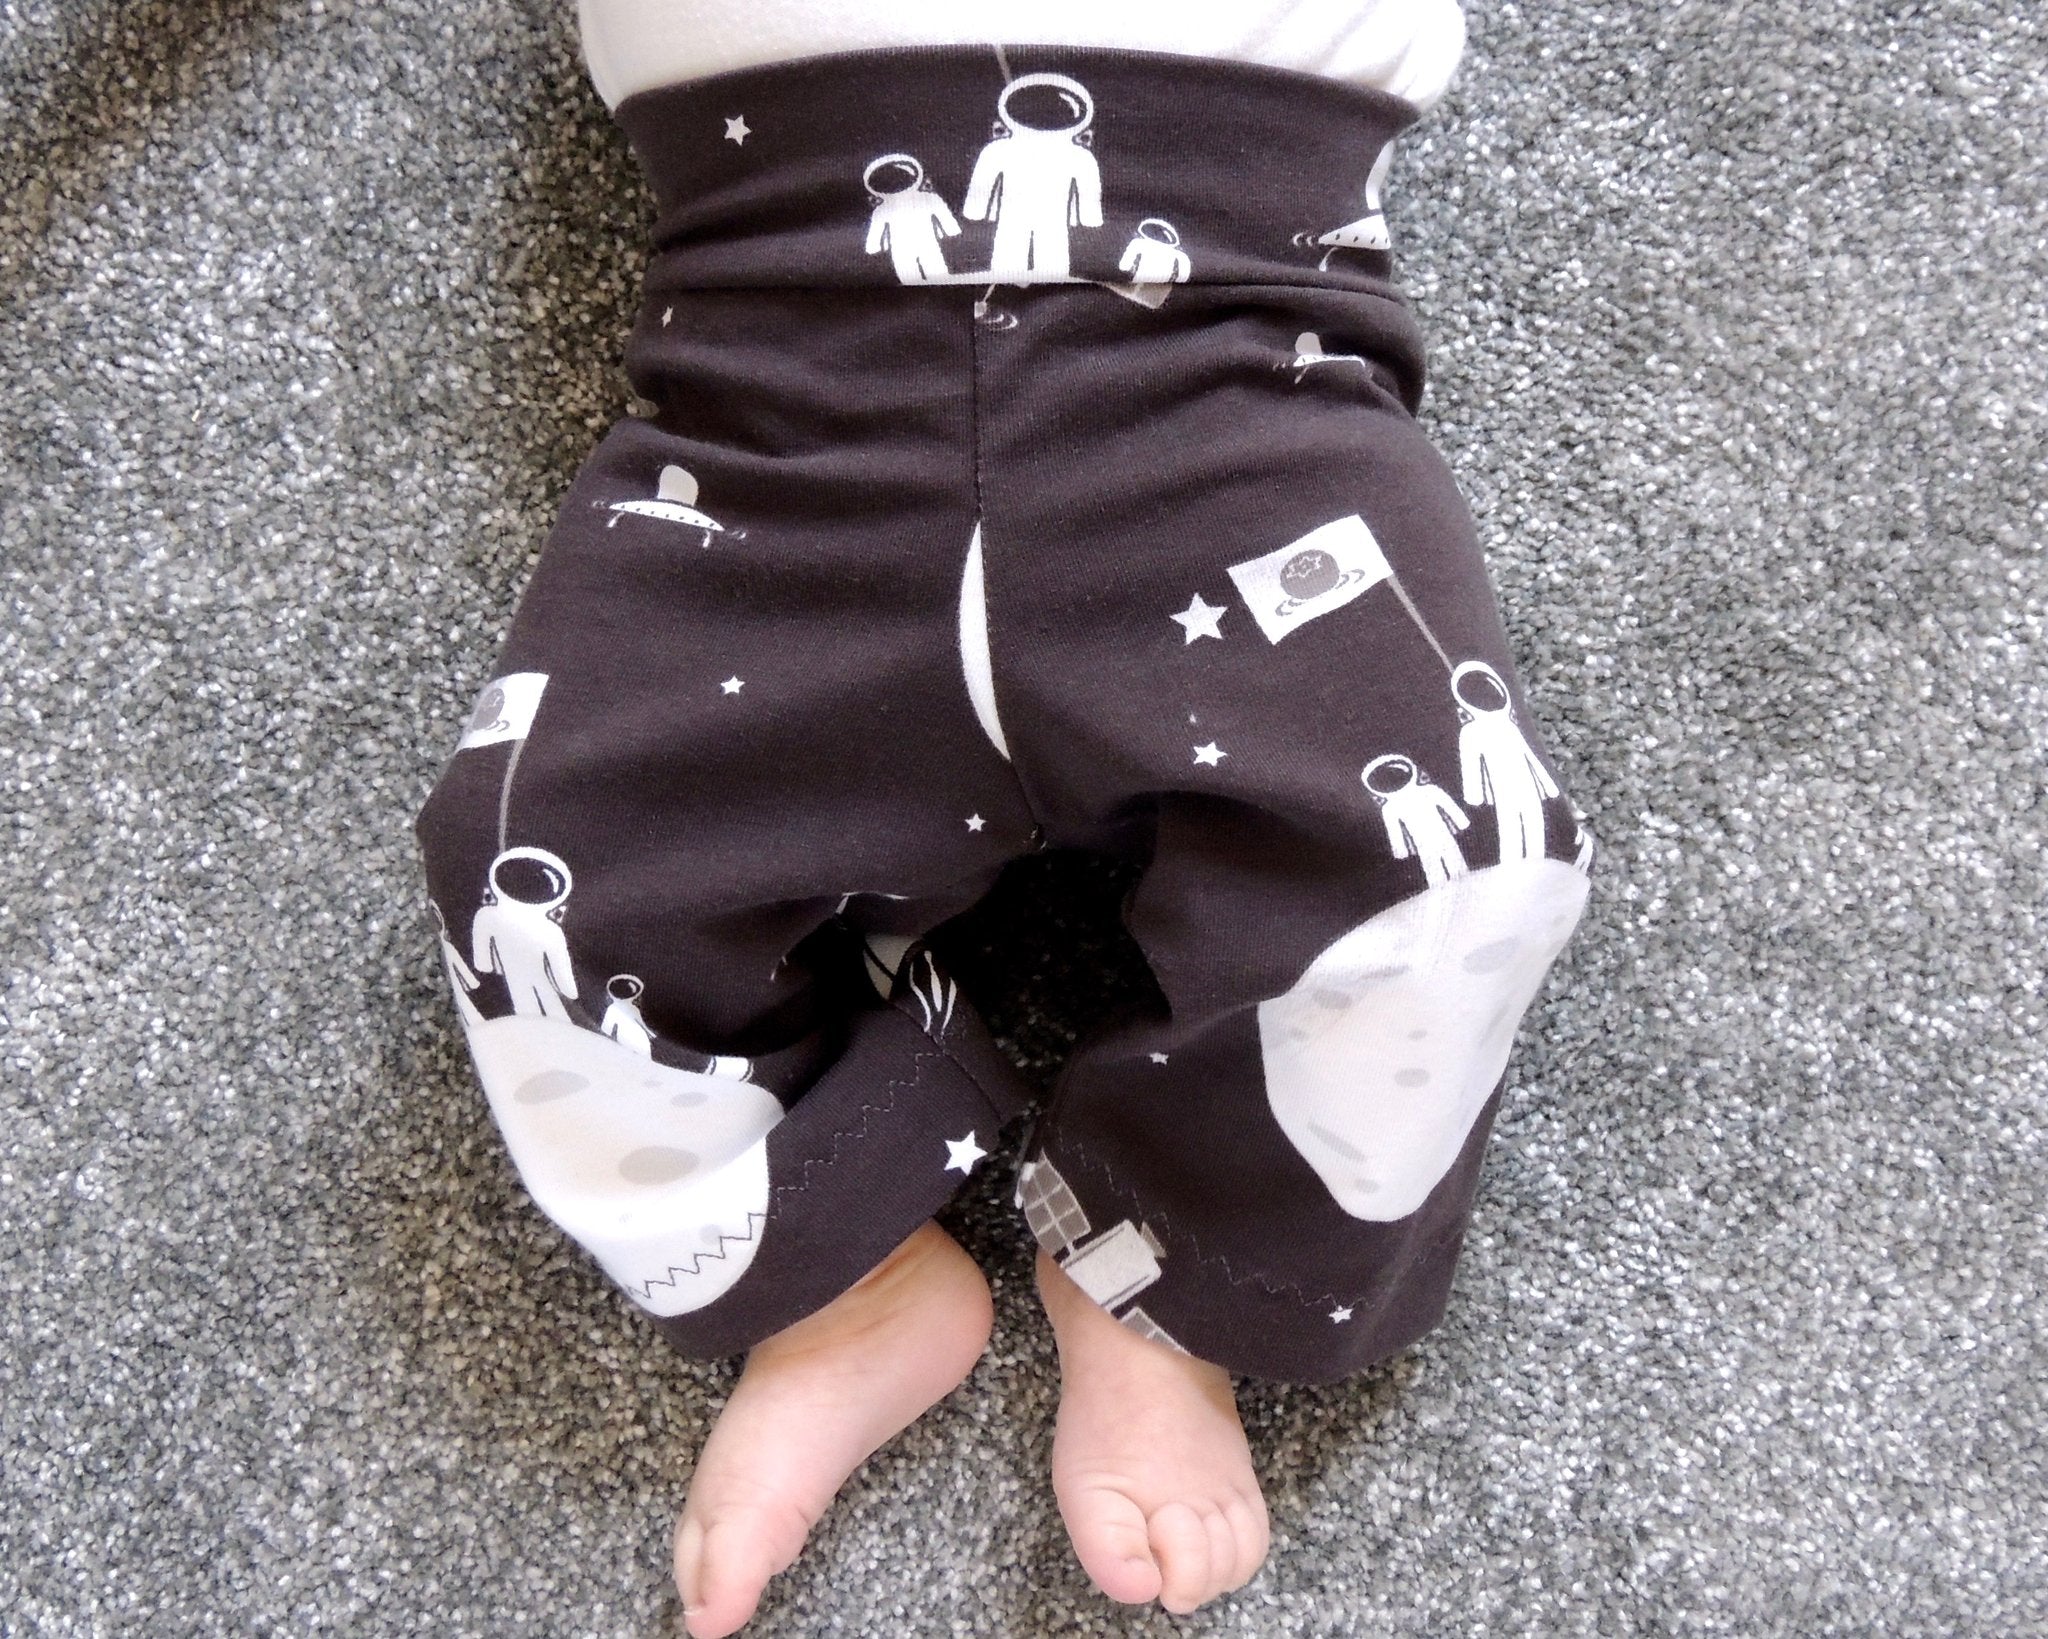 Dhurata Davies - Roo Top and Marley Bottoms (Newborn - 24 months) - Paper Sewing Pattern